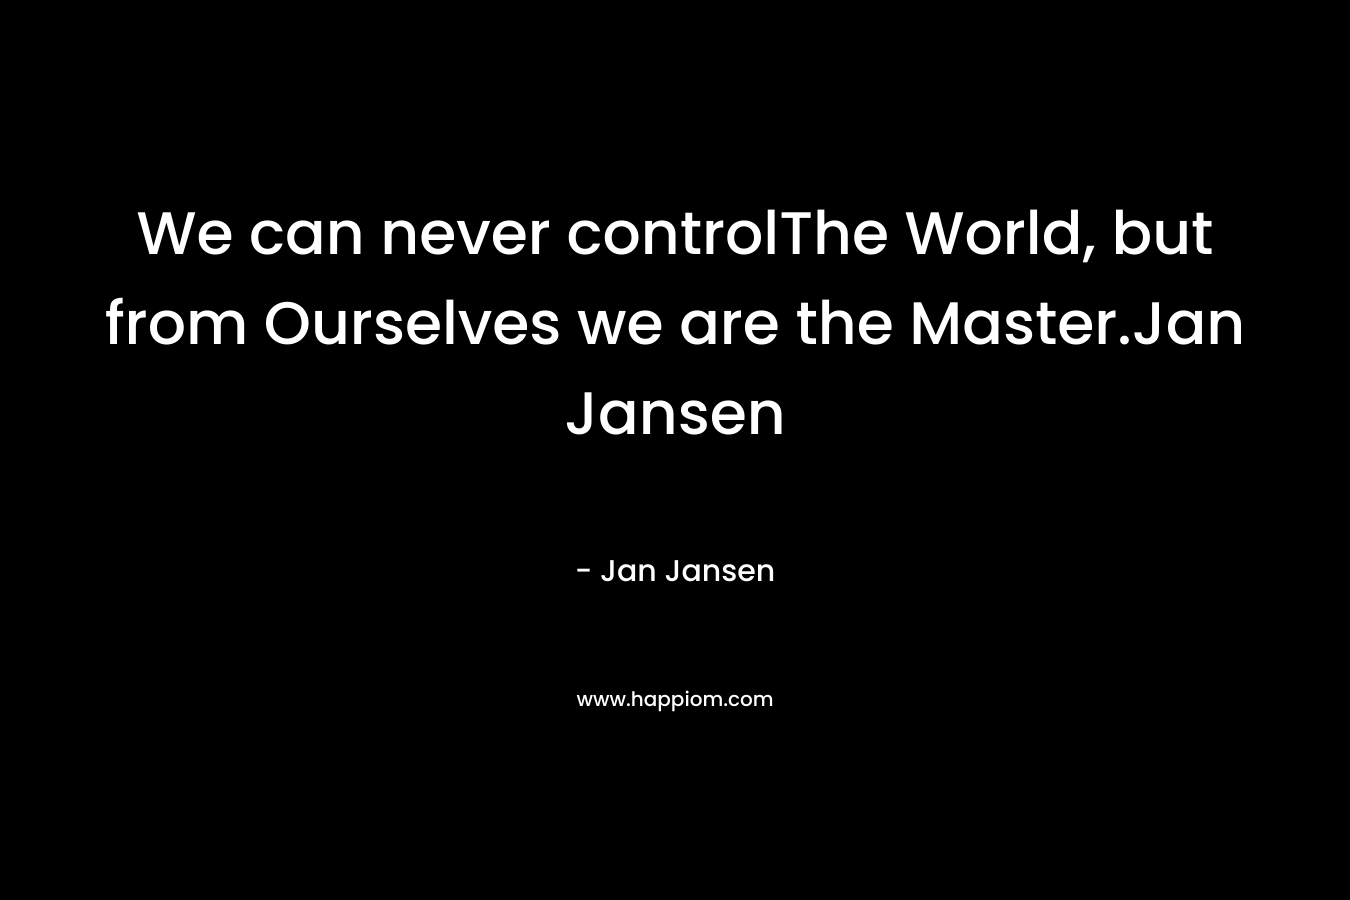 We can never controlThe World, but from Ourselves we are the Master.Jan Jansen